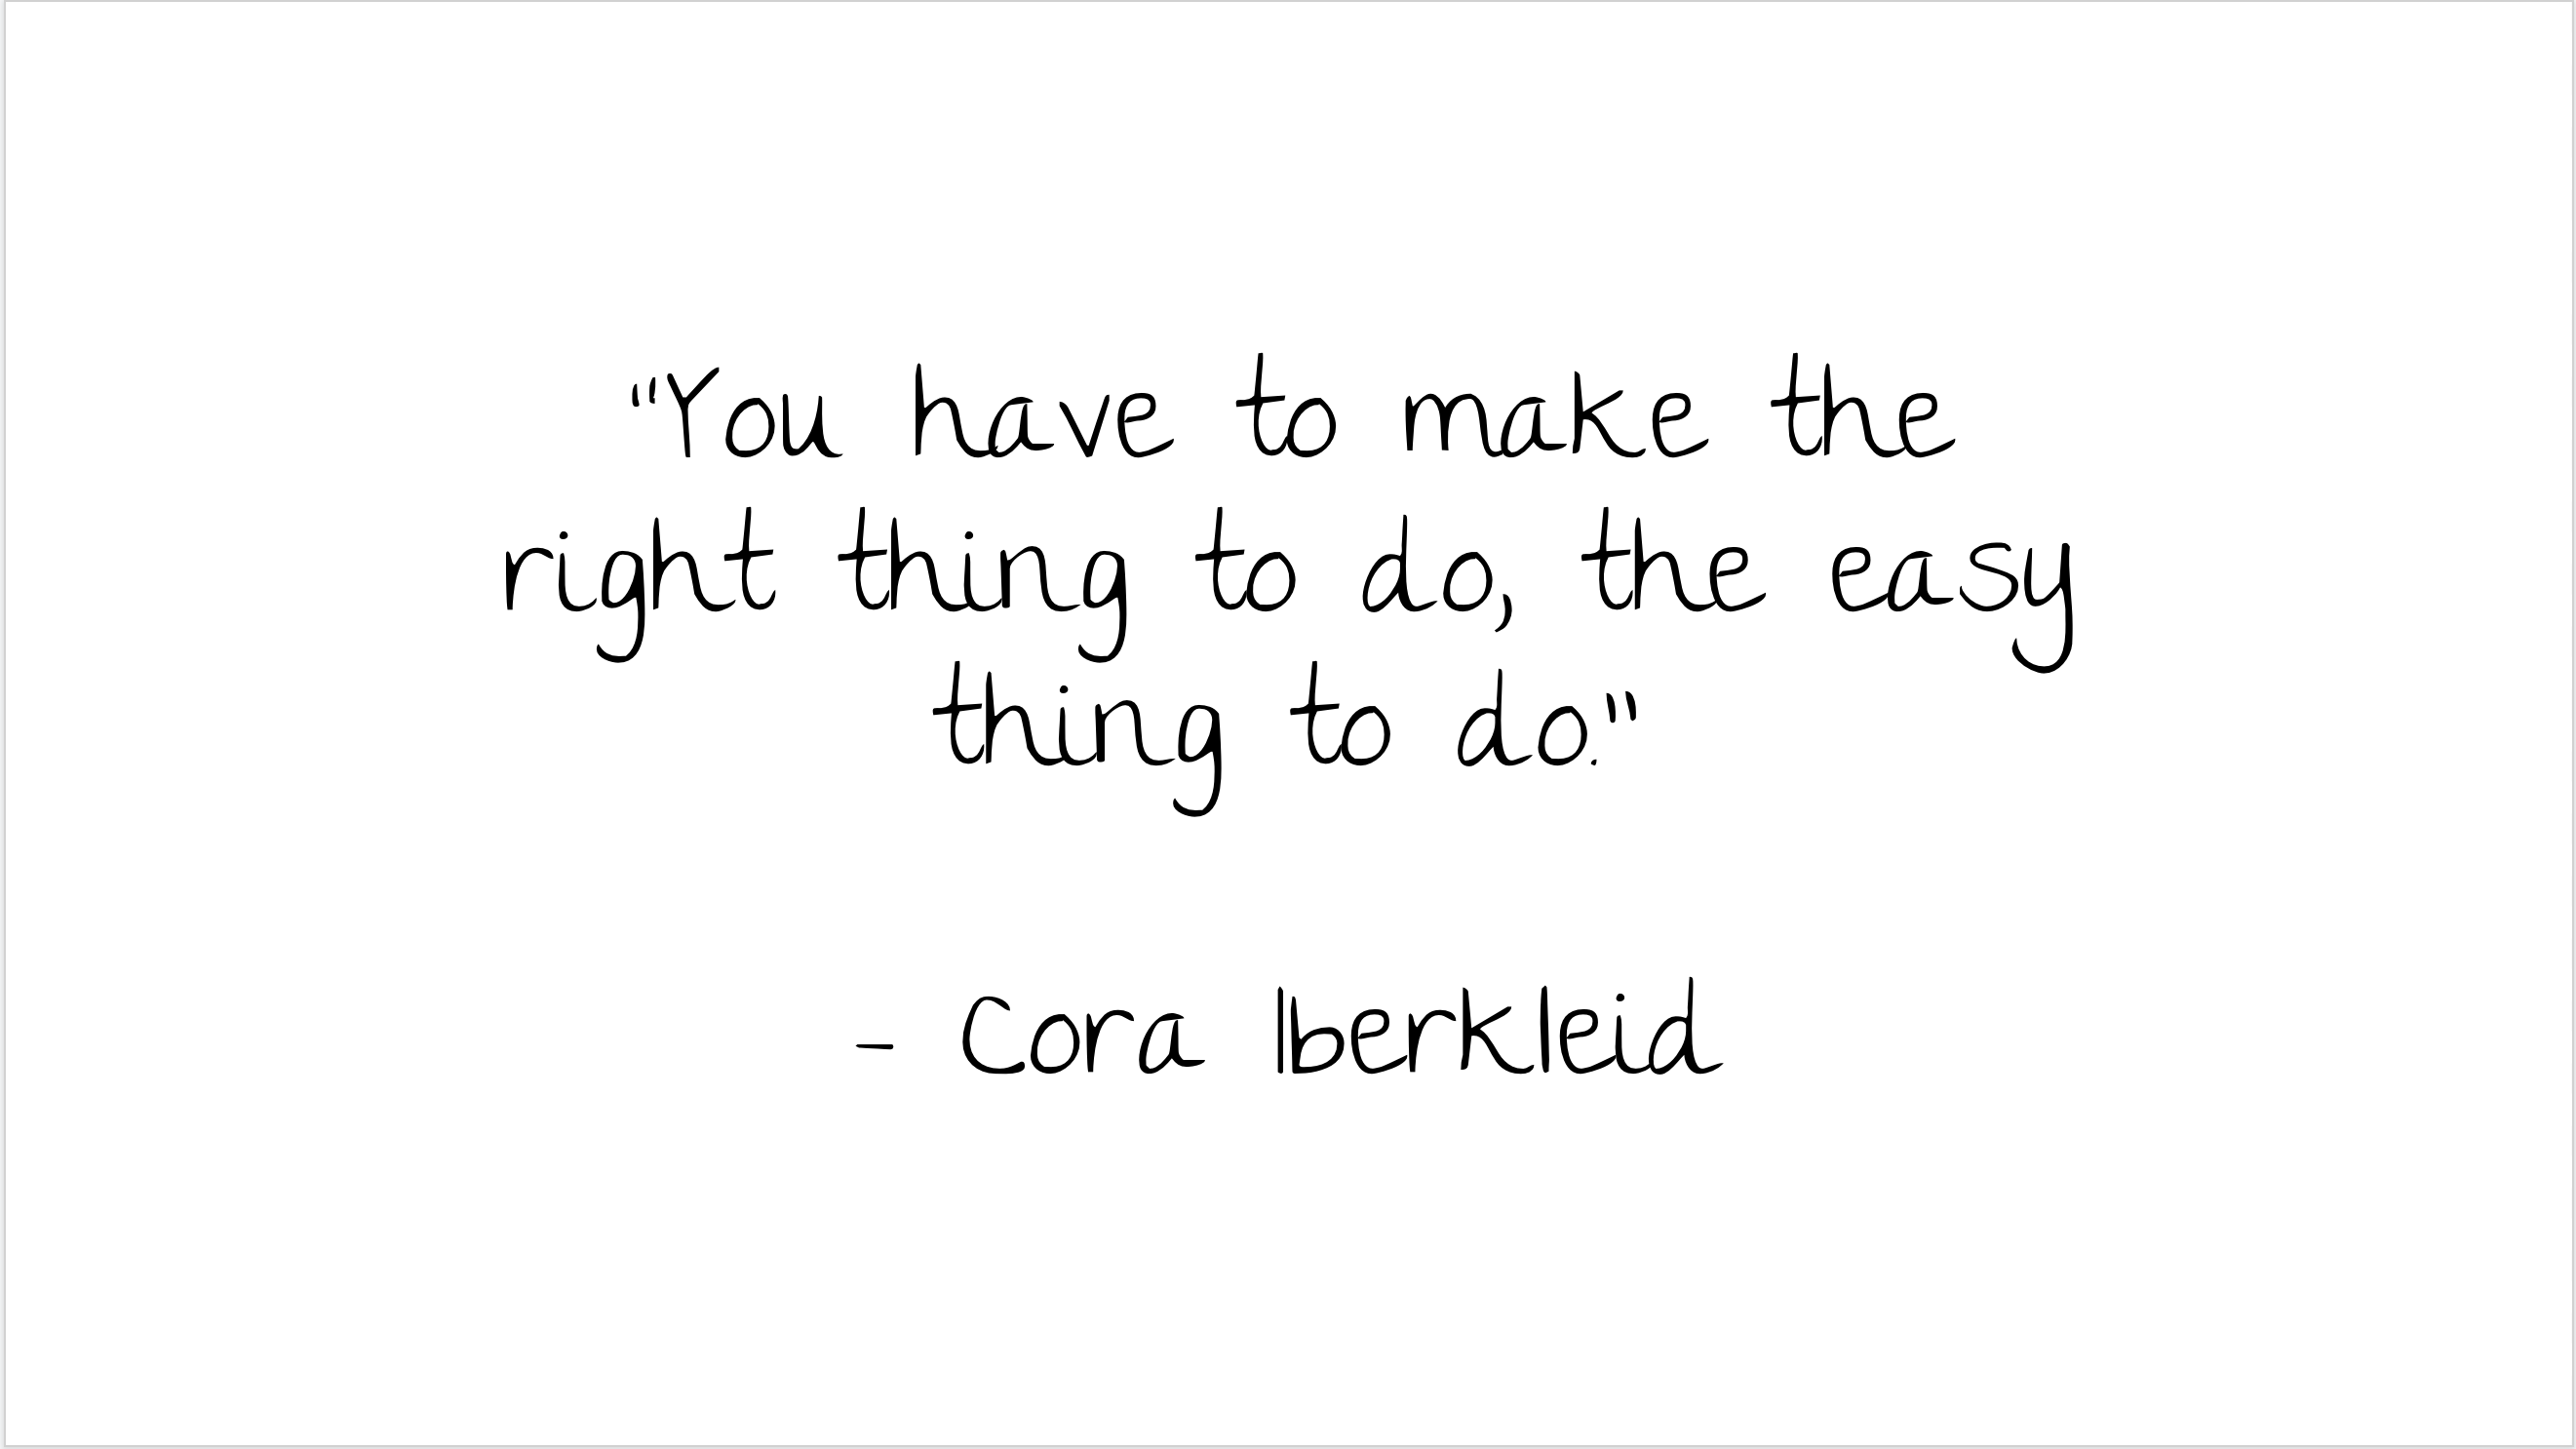 Testing Slide - Quote from Cora